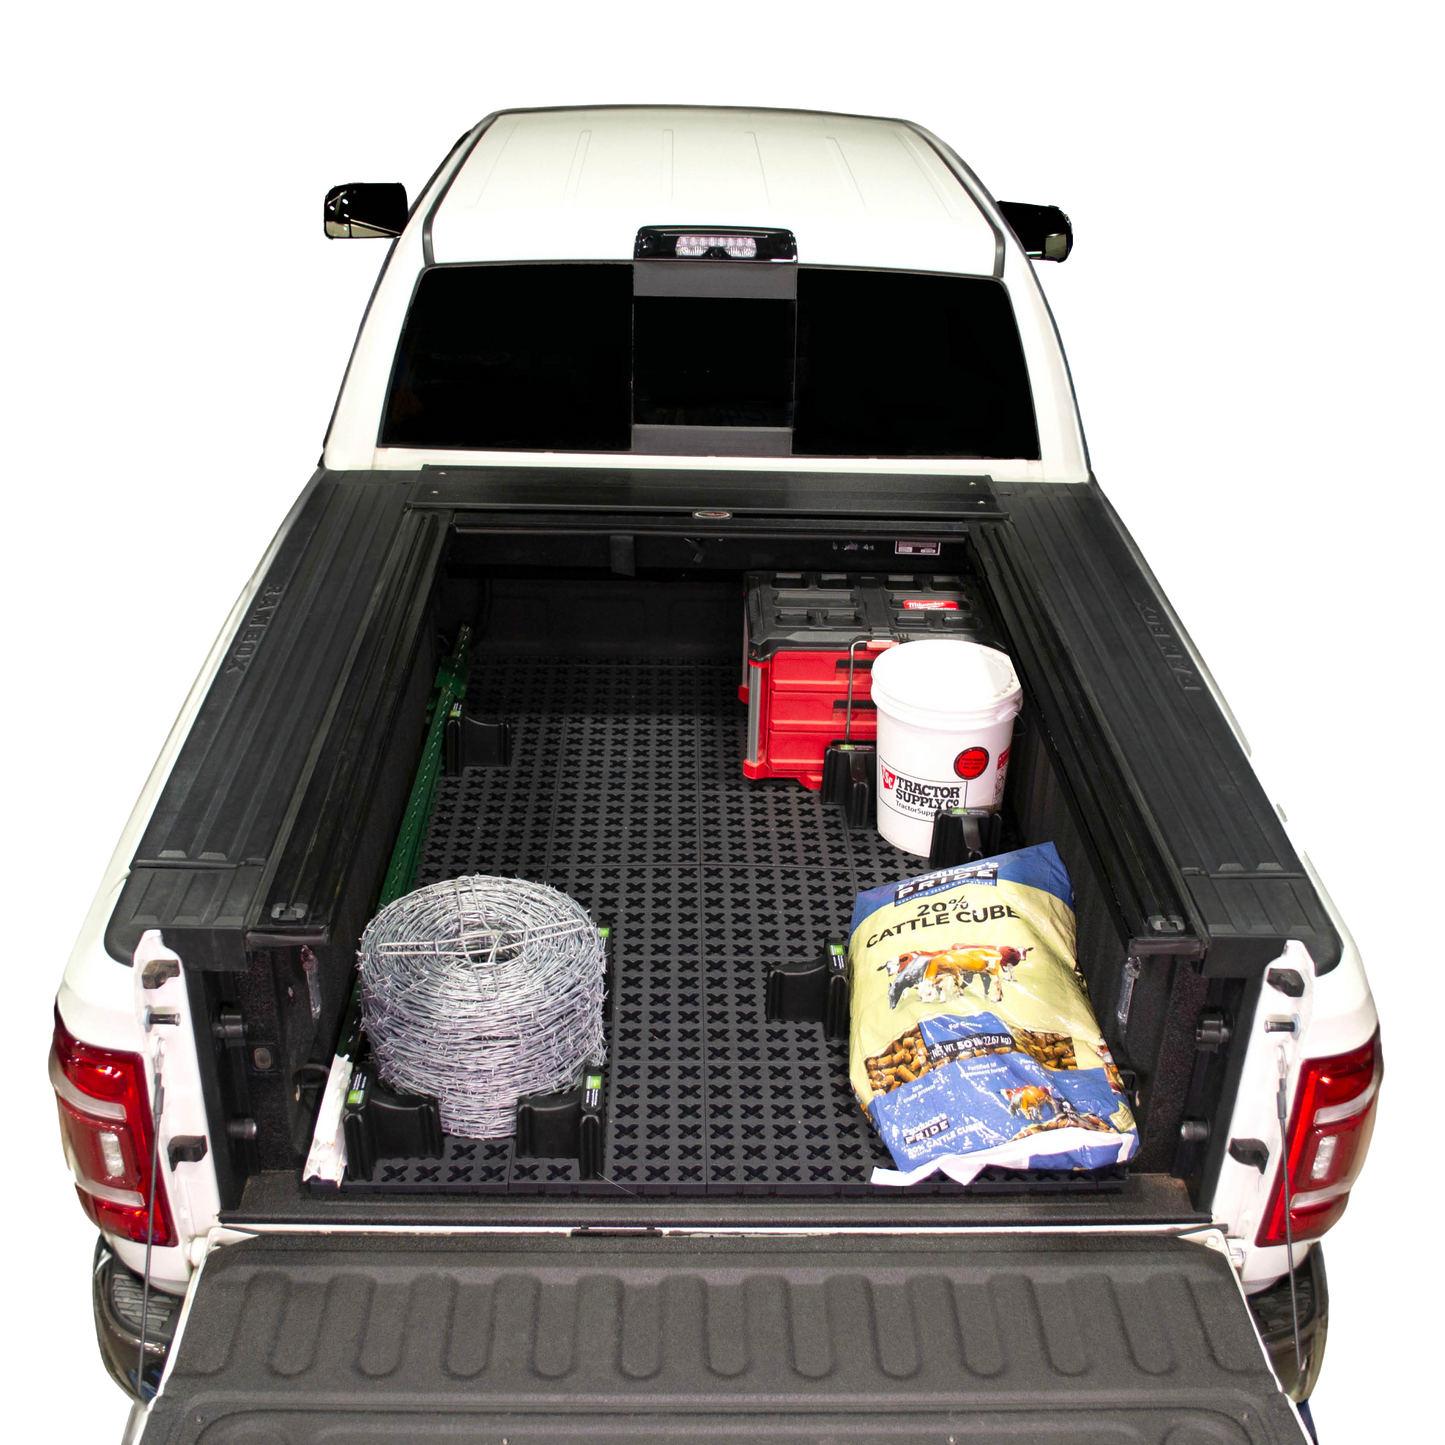 Tmat Truck Bed Mat & Cargo Management System (Short Bed 5' to 5'5")